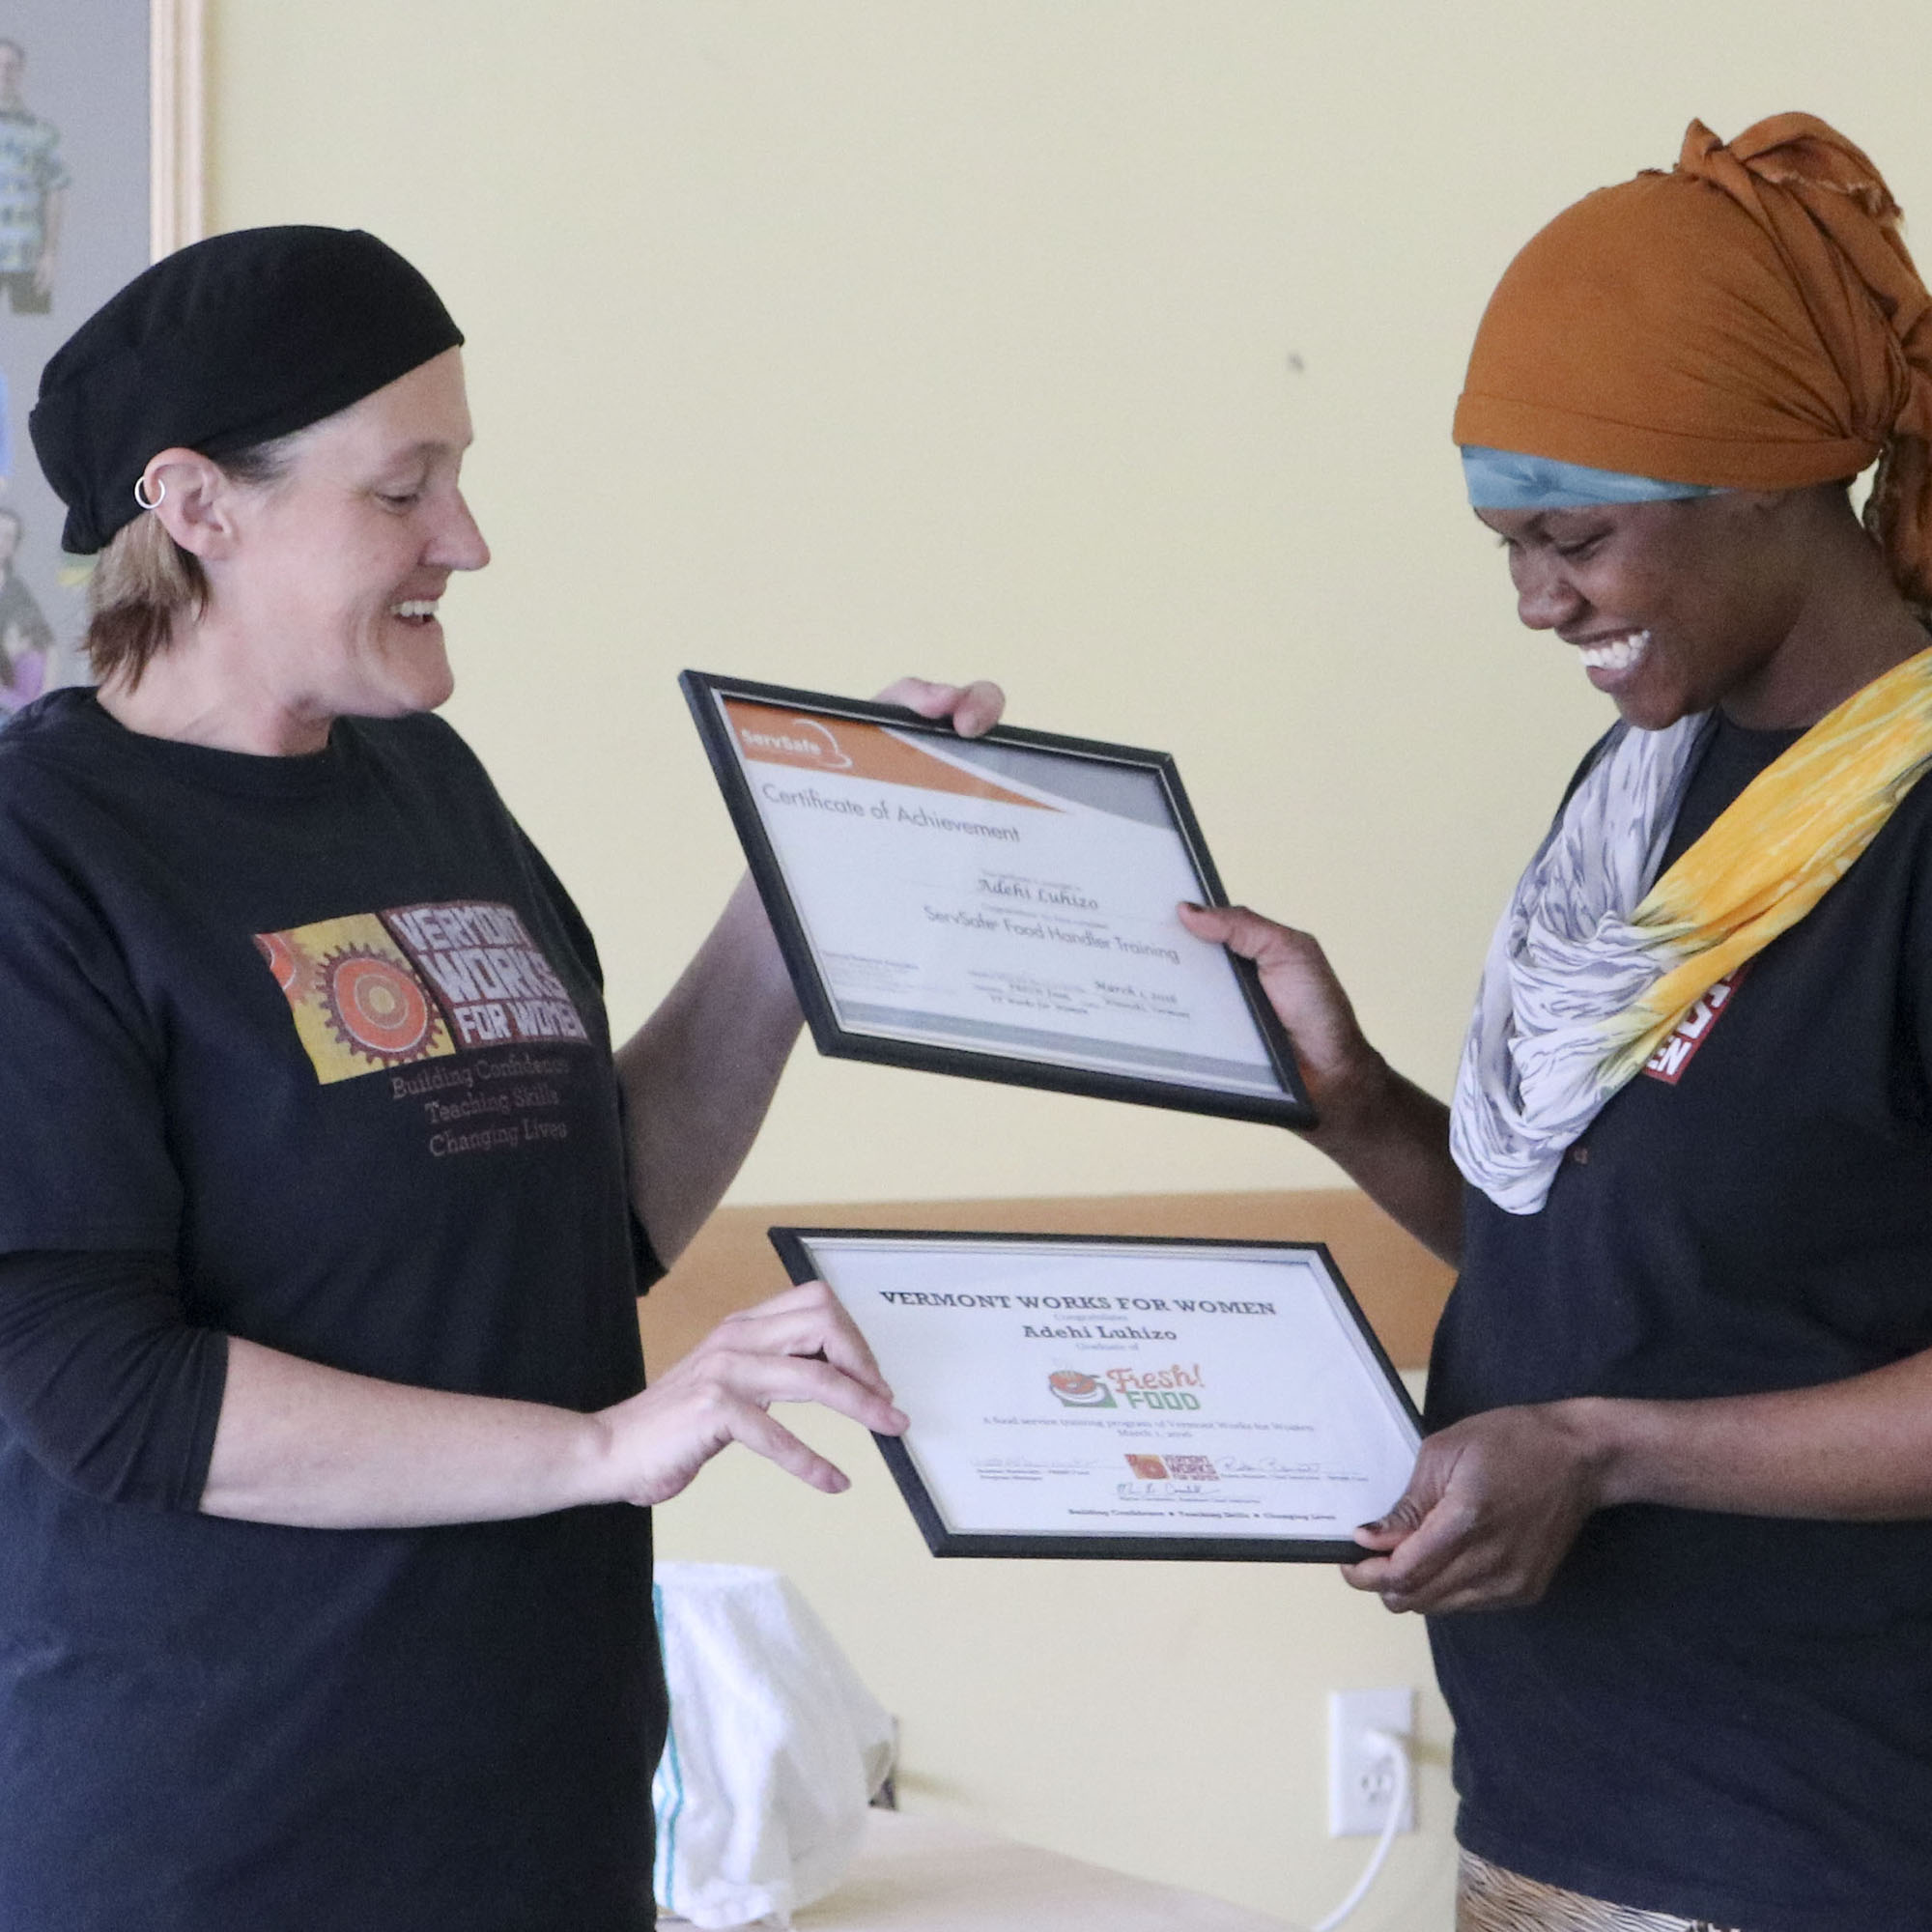 Vermont Works for Women's staff member hands a graduation certificate to a participant. Fresh Foods is a past program of VWW.